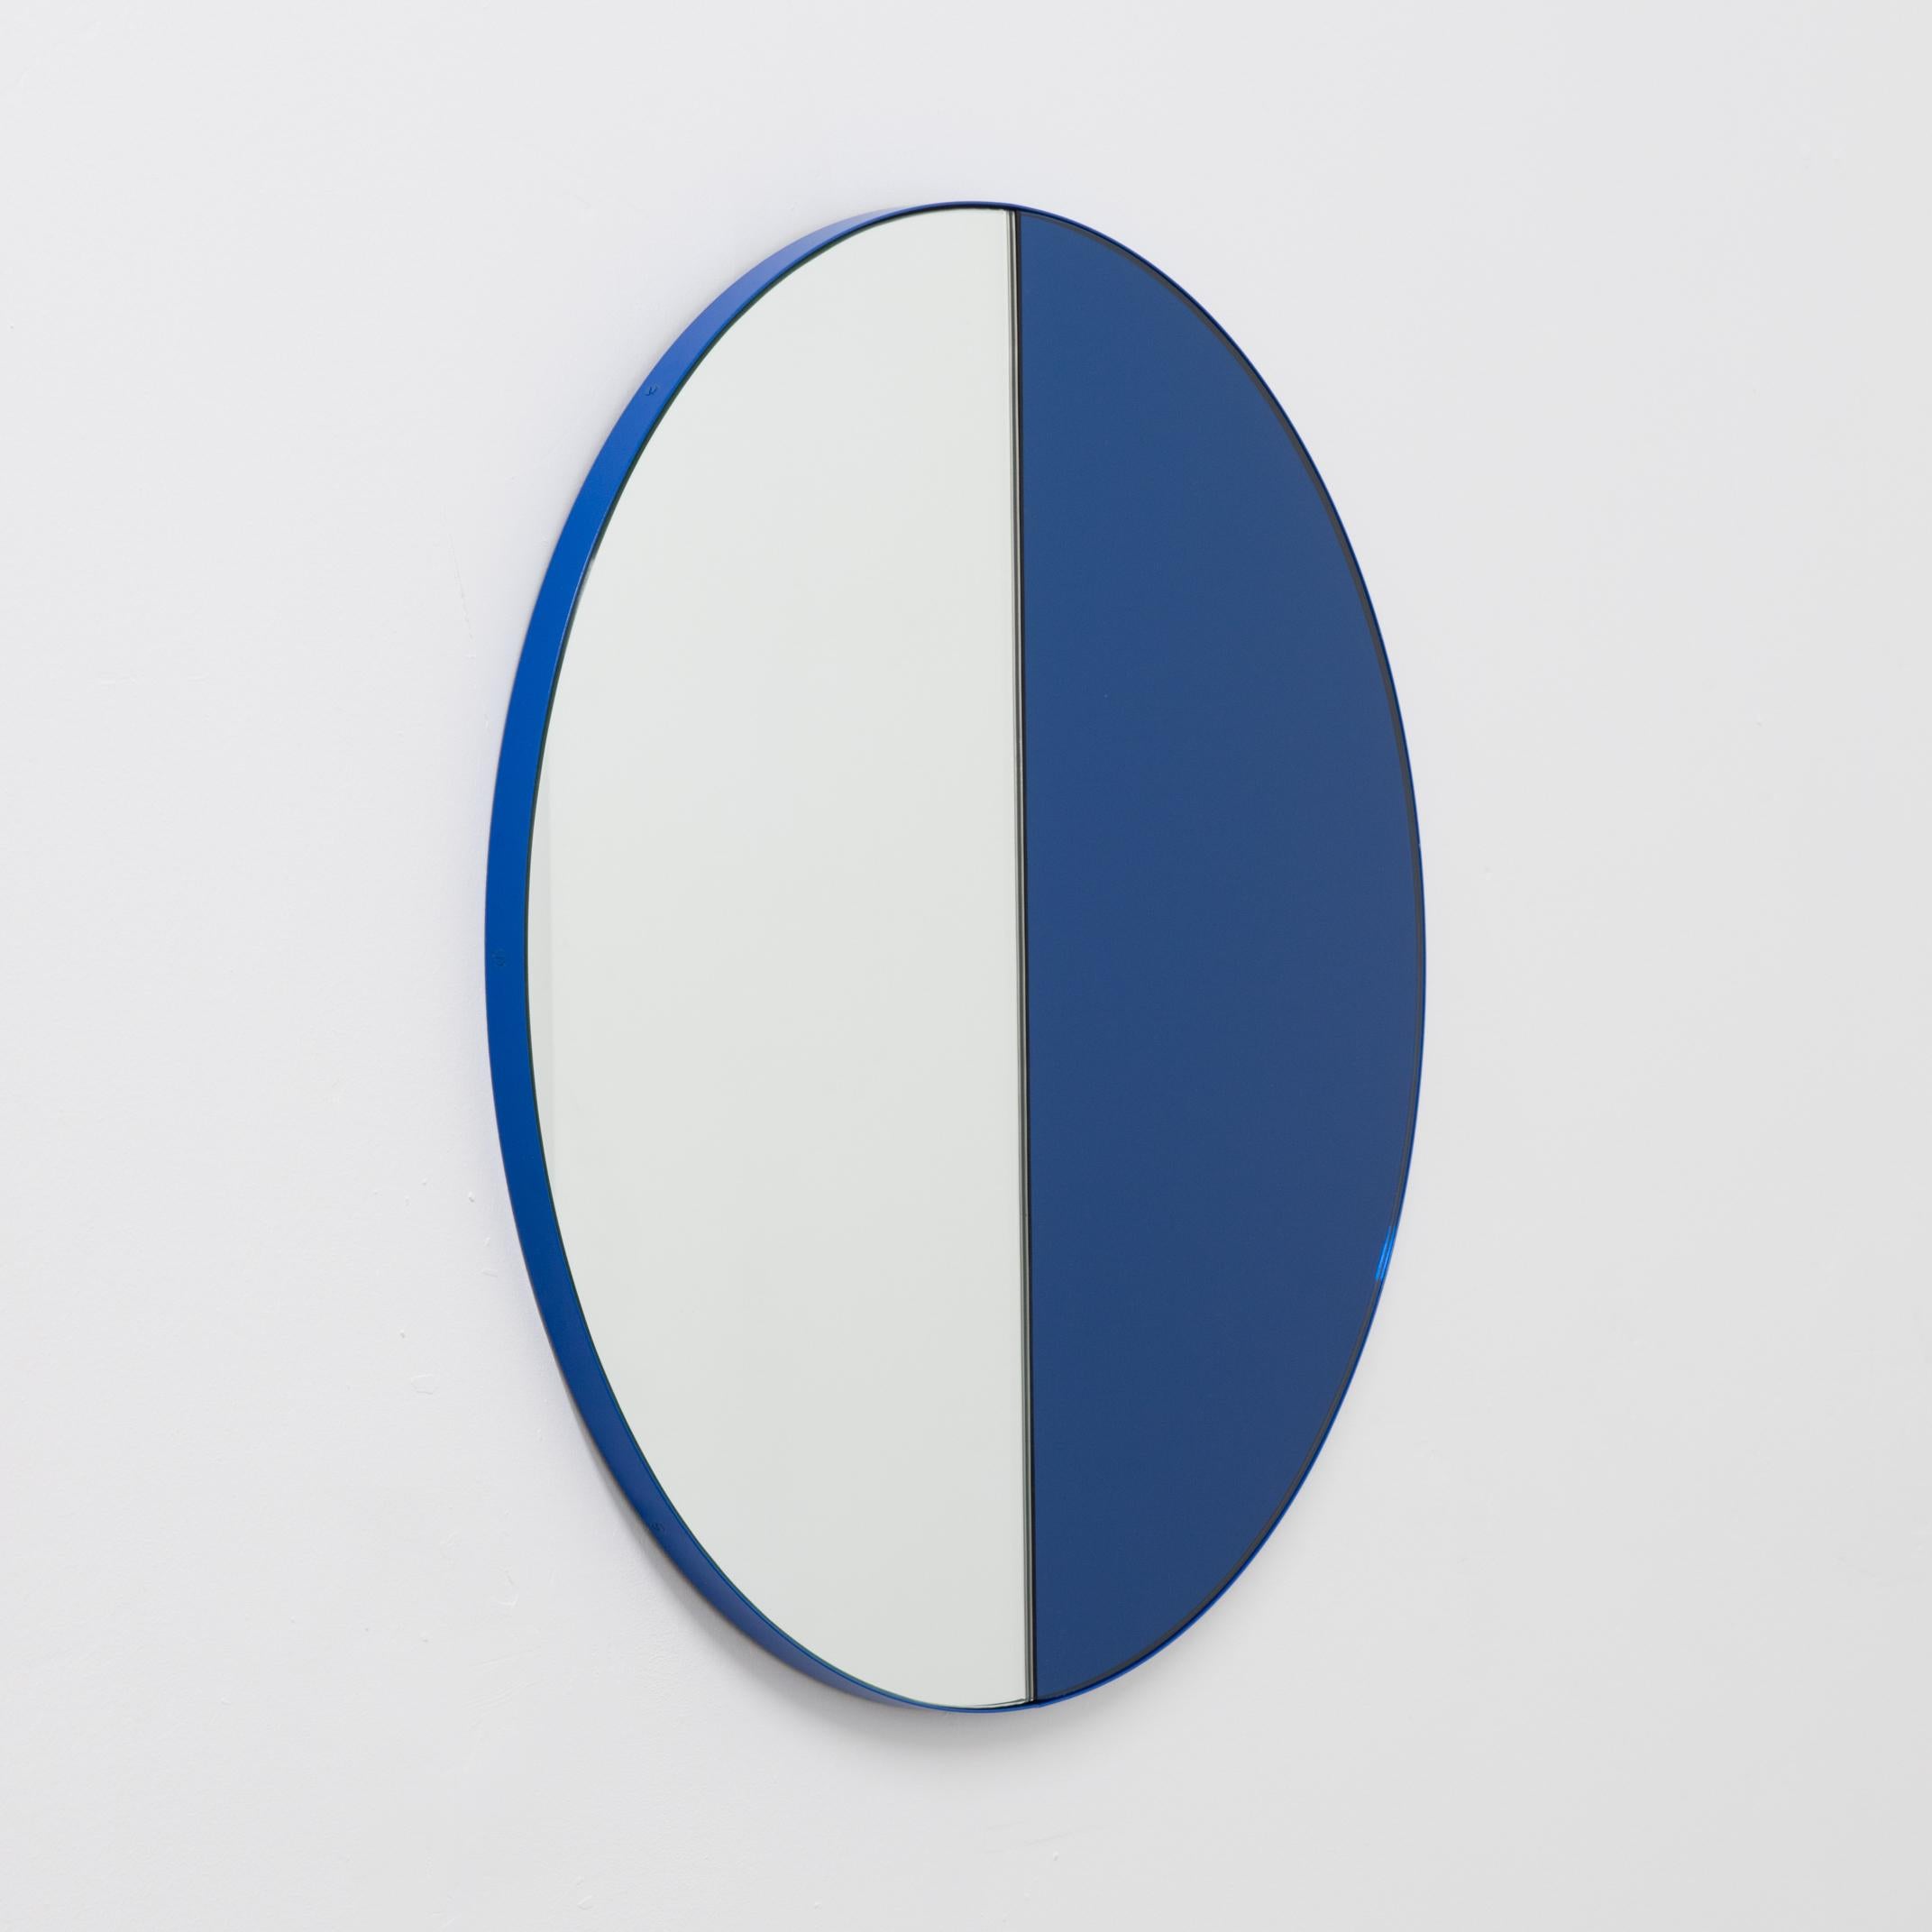 Orbis Dualis Mixed Blue Tinted Contemporary Round Mirror with Blue Frame, Small In New Condition For Sale In London, GB